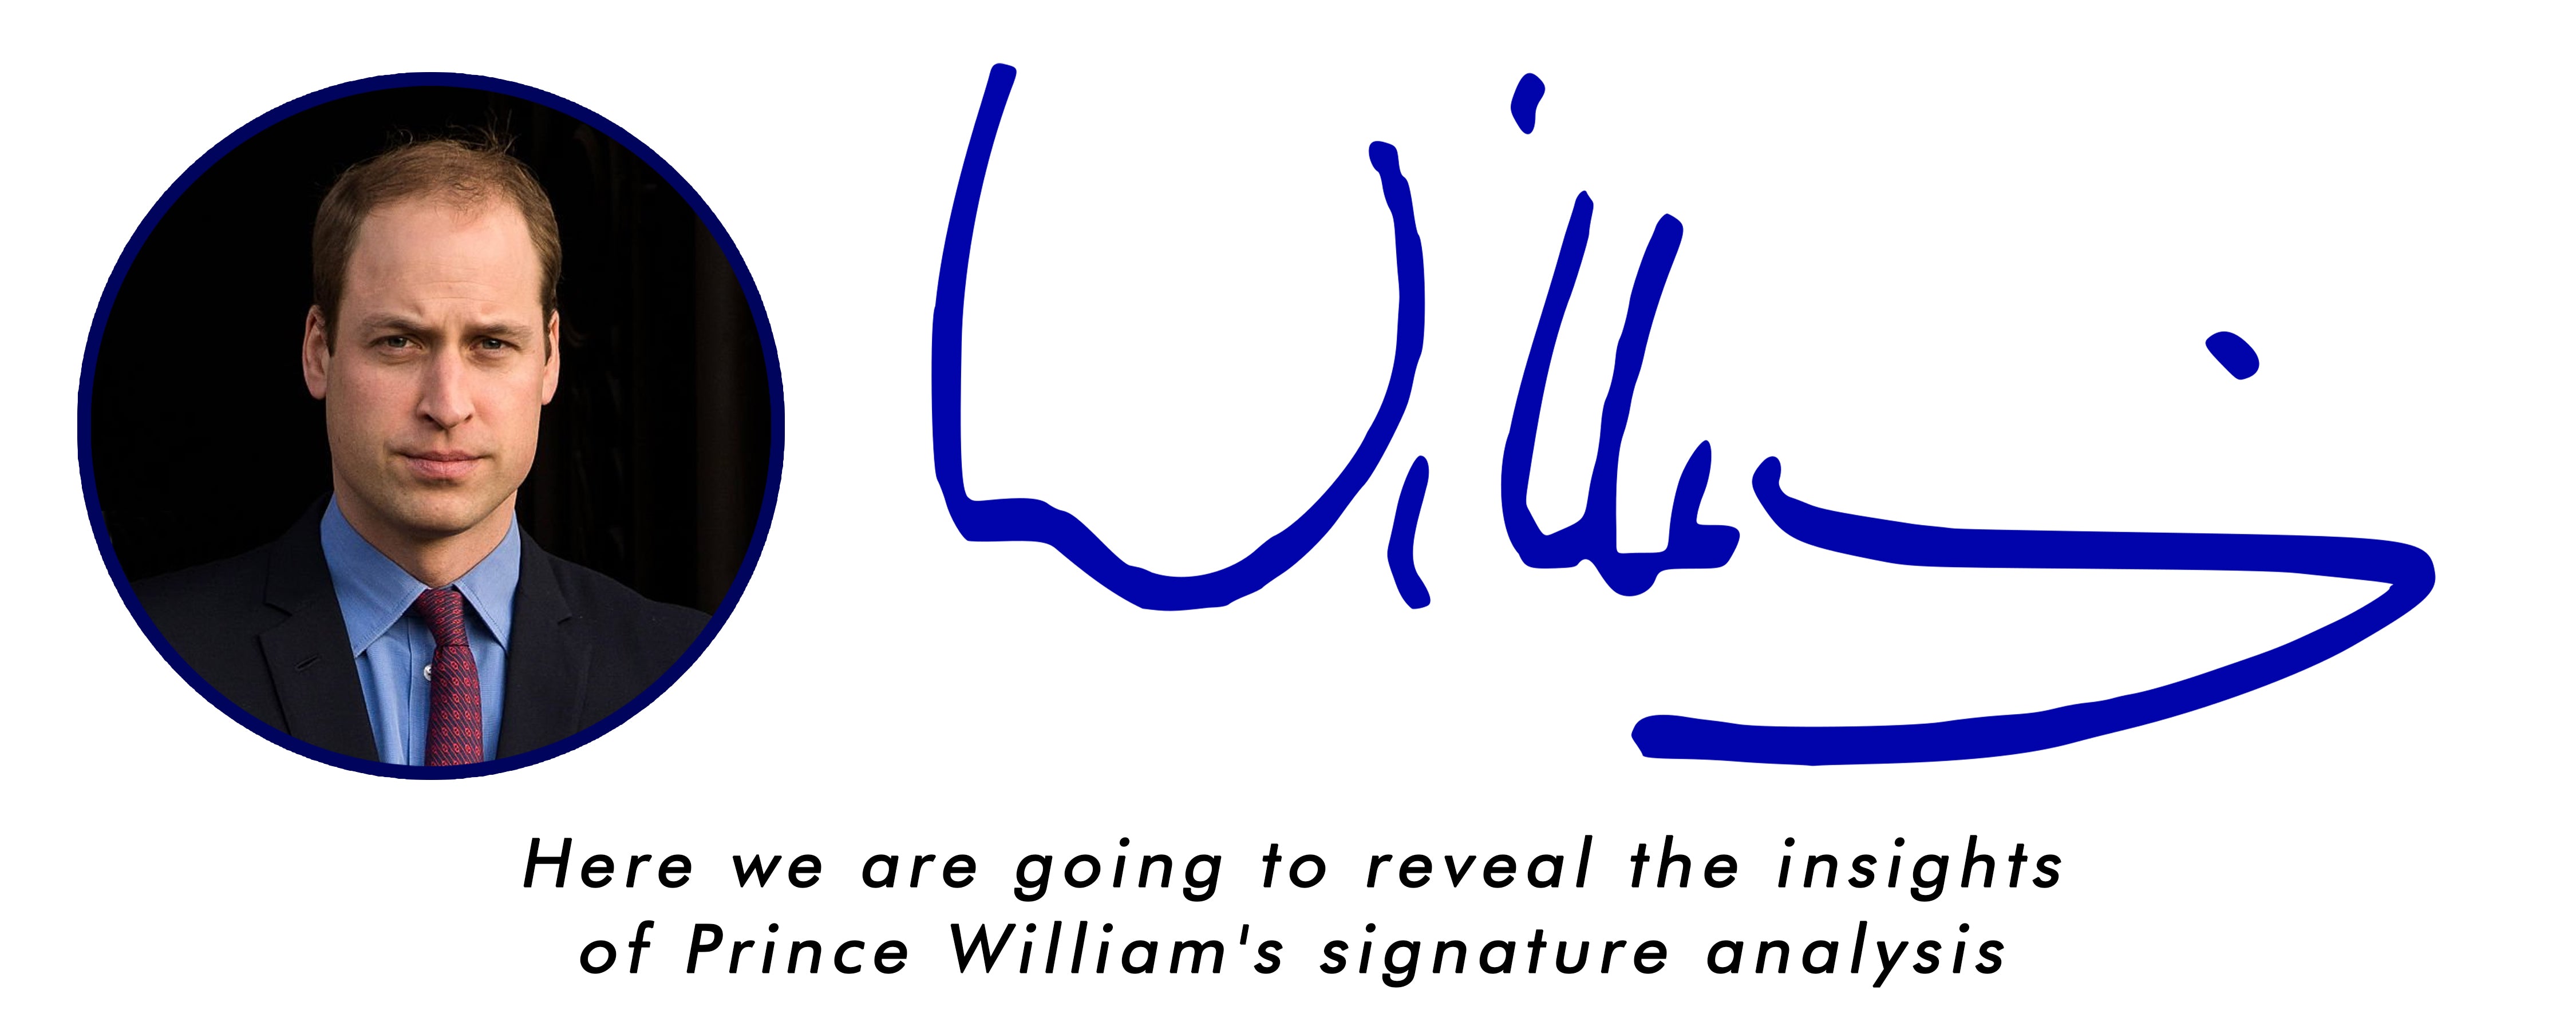 Here we are going to reveal the insights of Prince William's signature analysis.